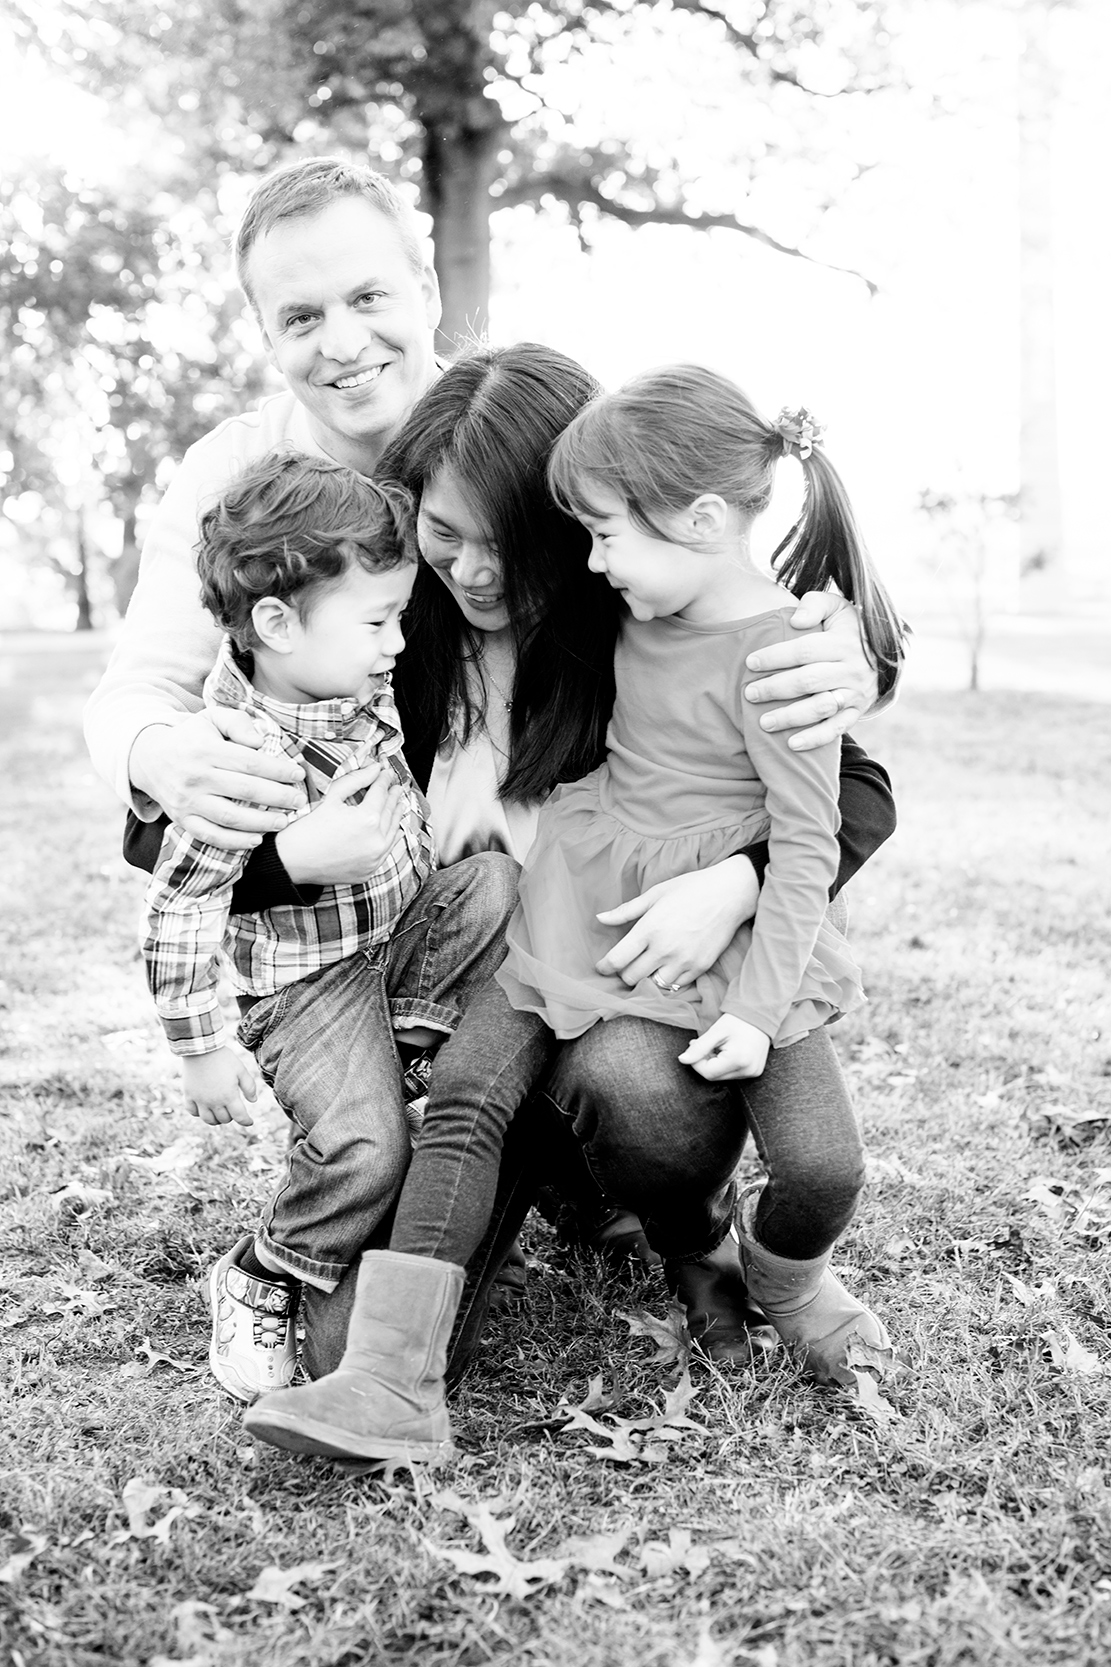 Fun Family of Four Fall Photos at Libby Hill Park - Image Property of www.j-dphoto.com